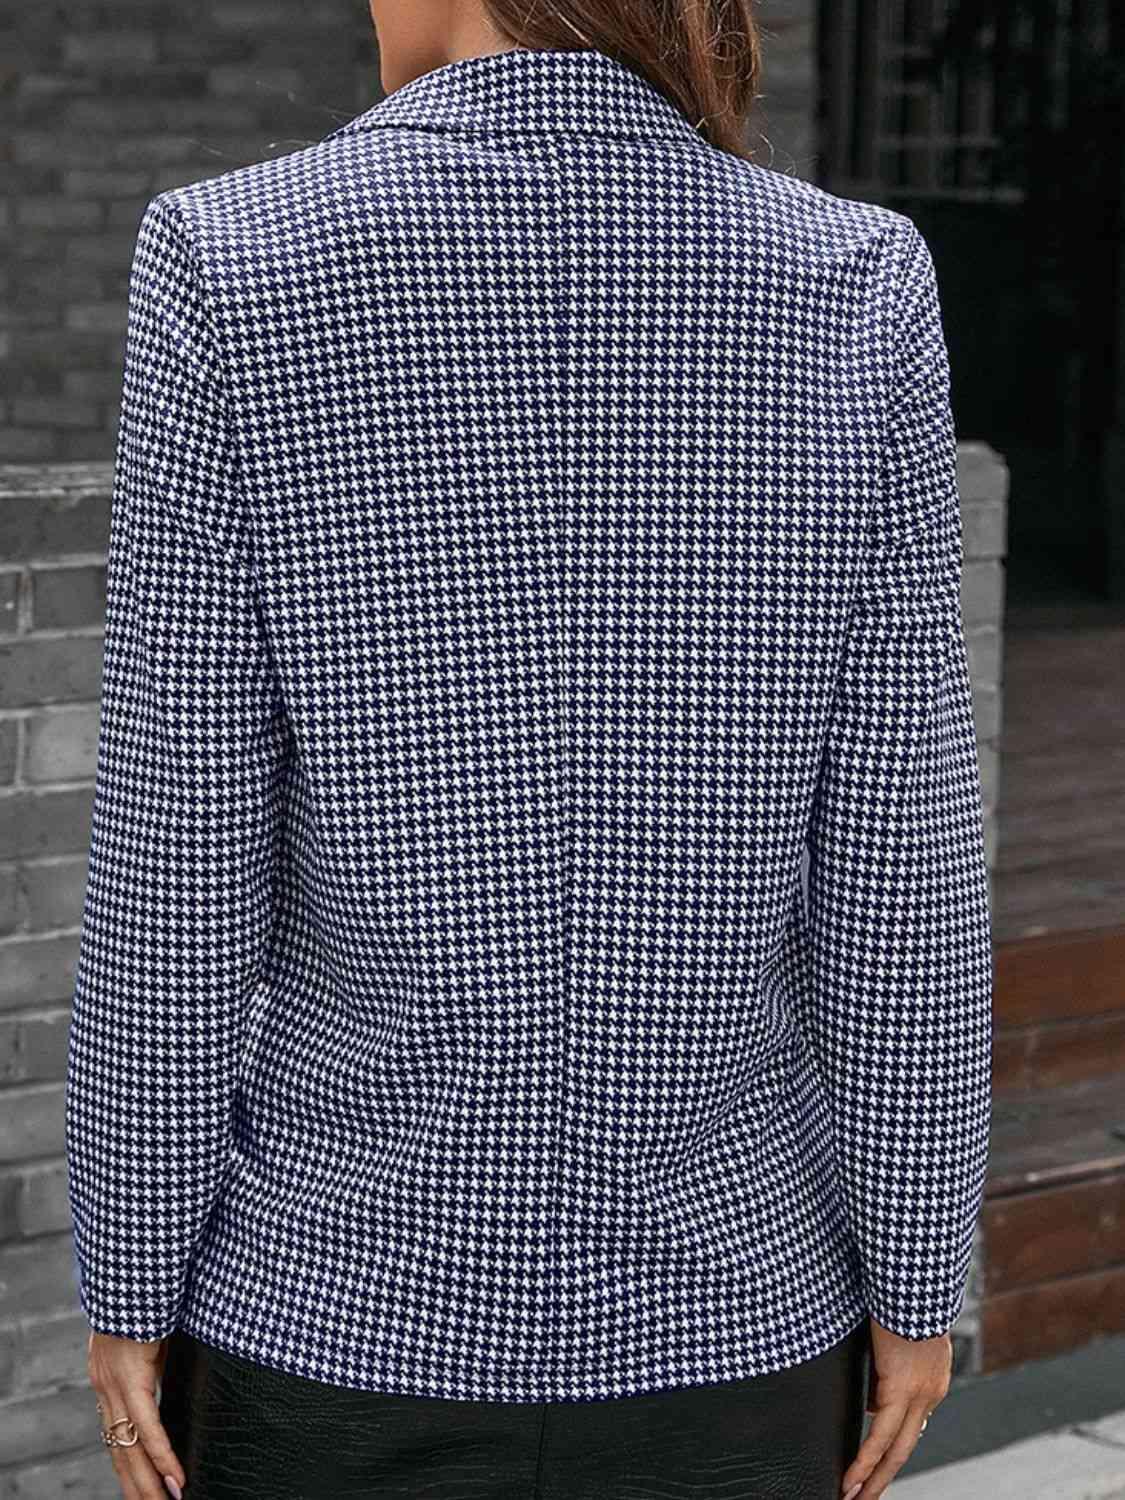 a woman wearing a blue and white checkered blazer